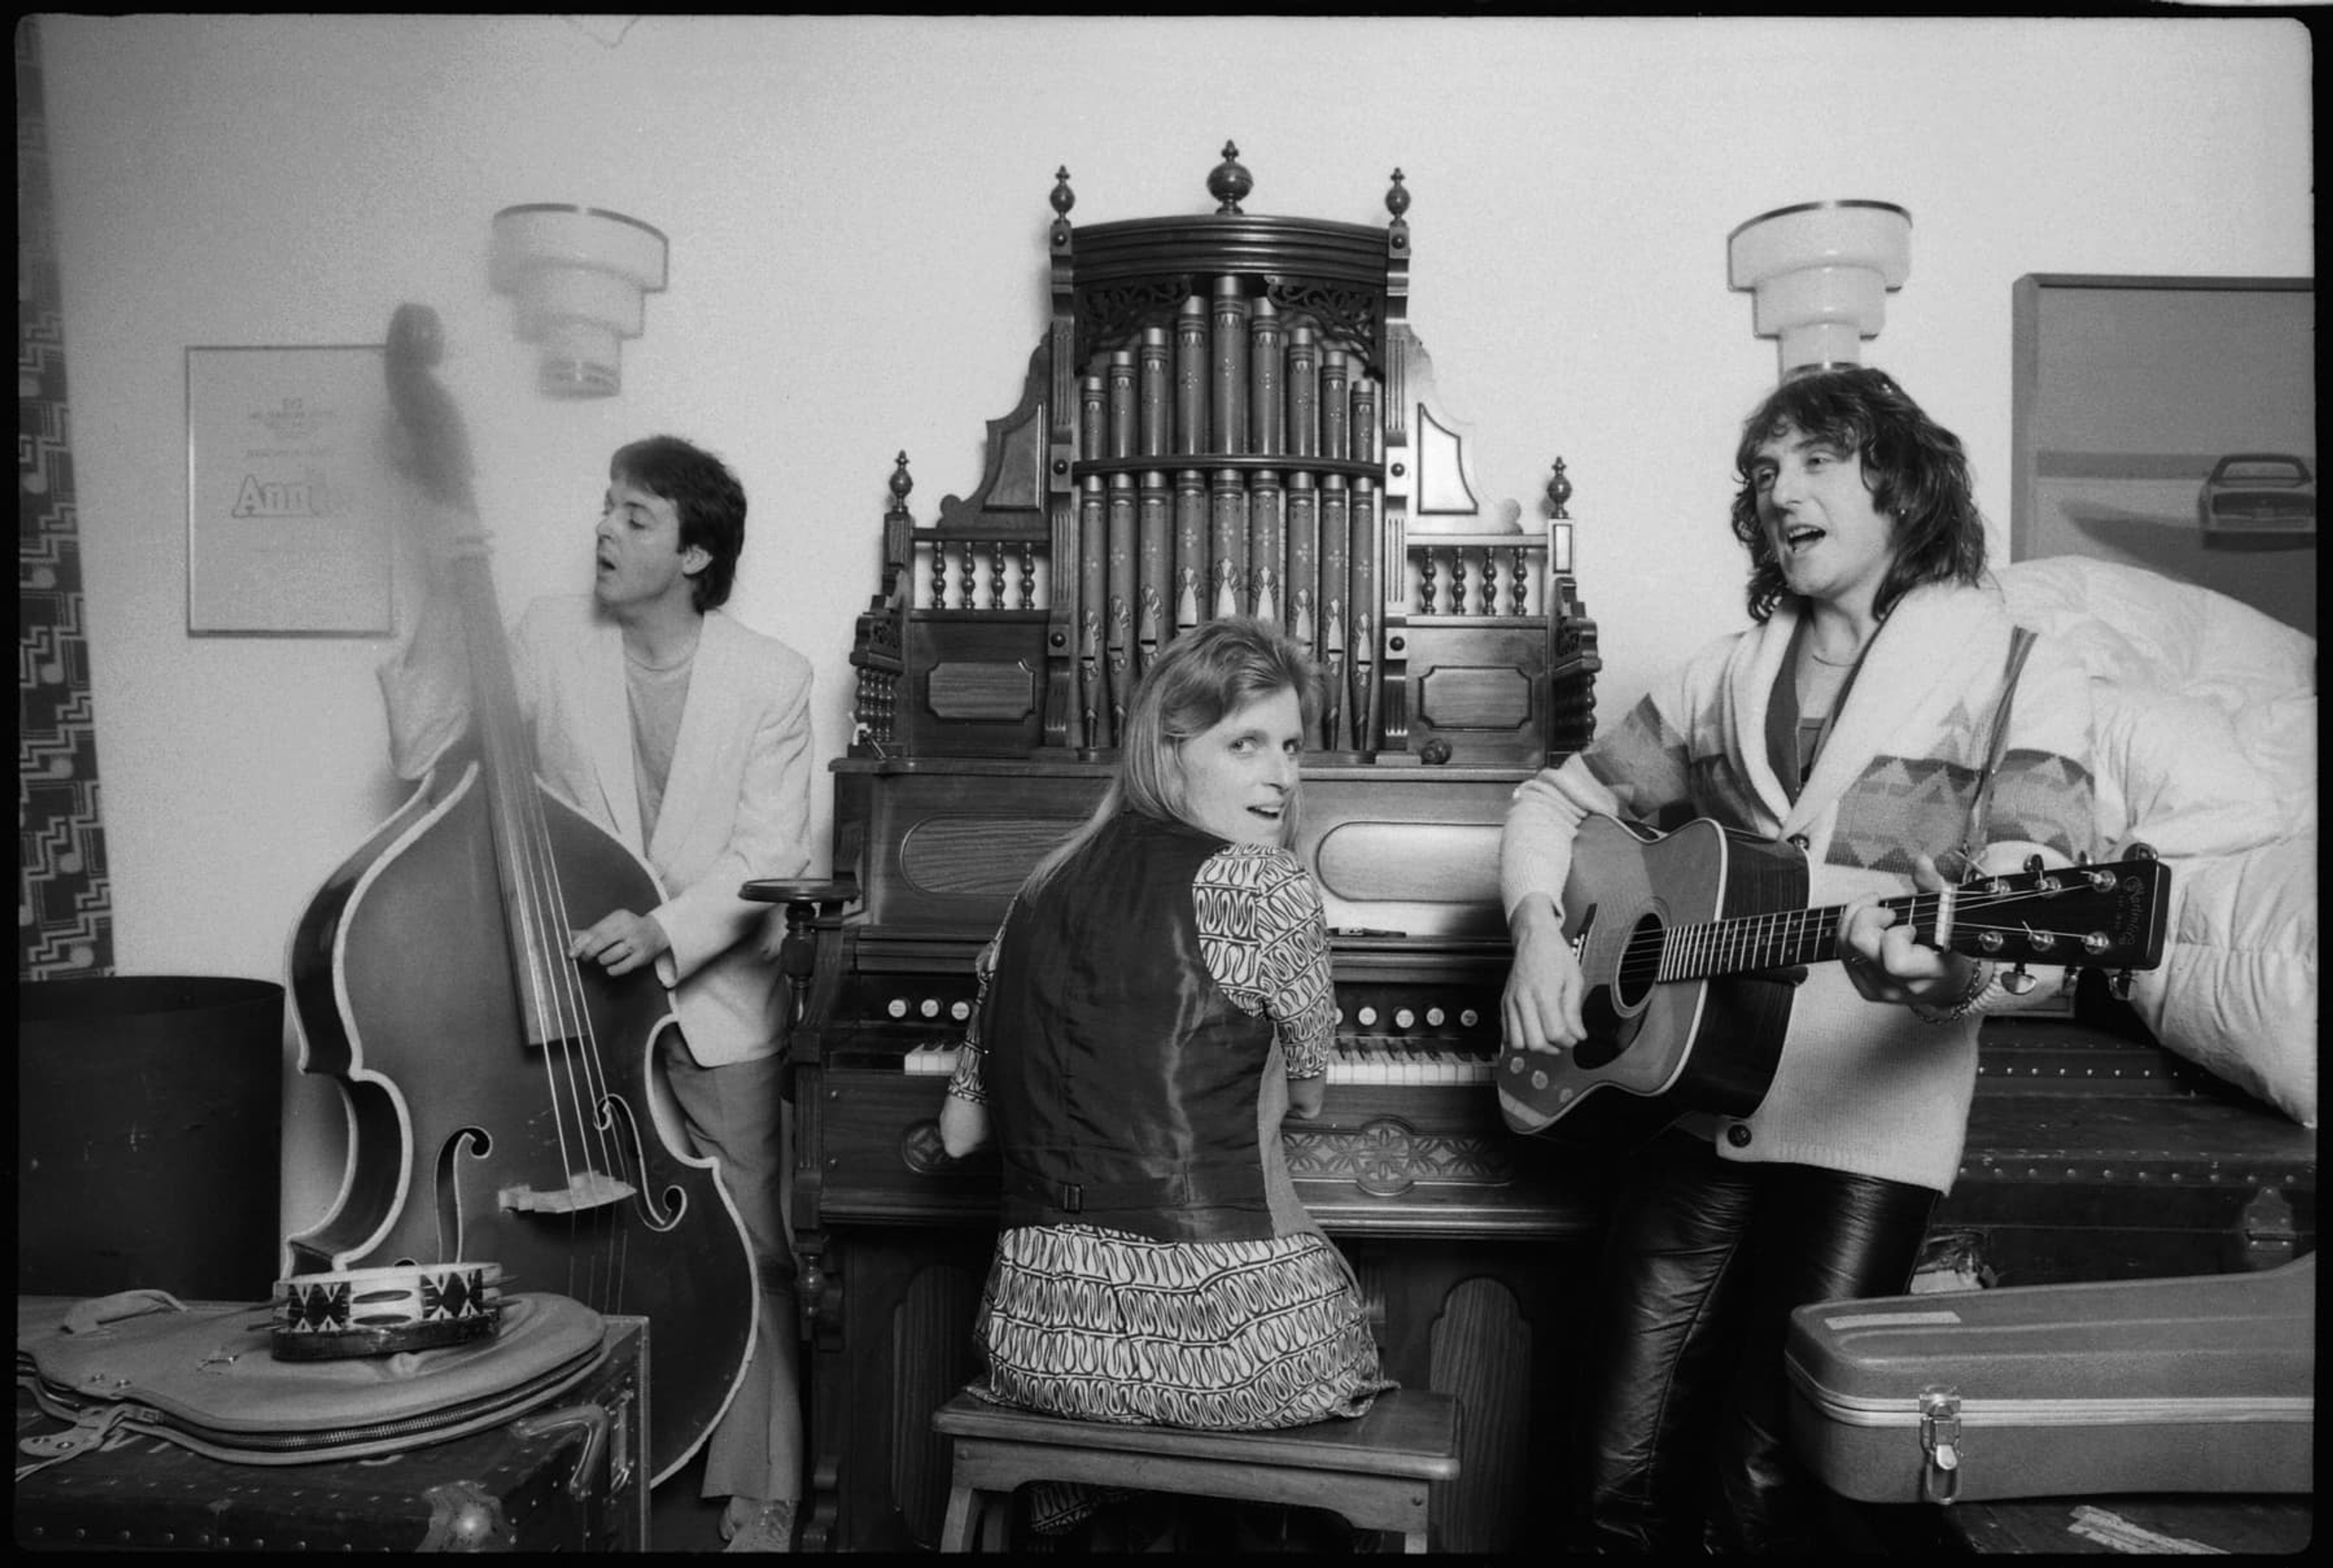 Paul, Linda, and Denny Laine playing instruments